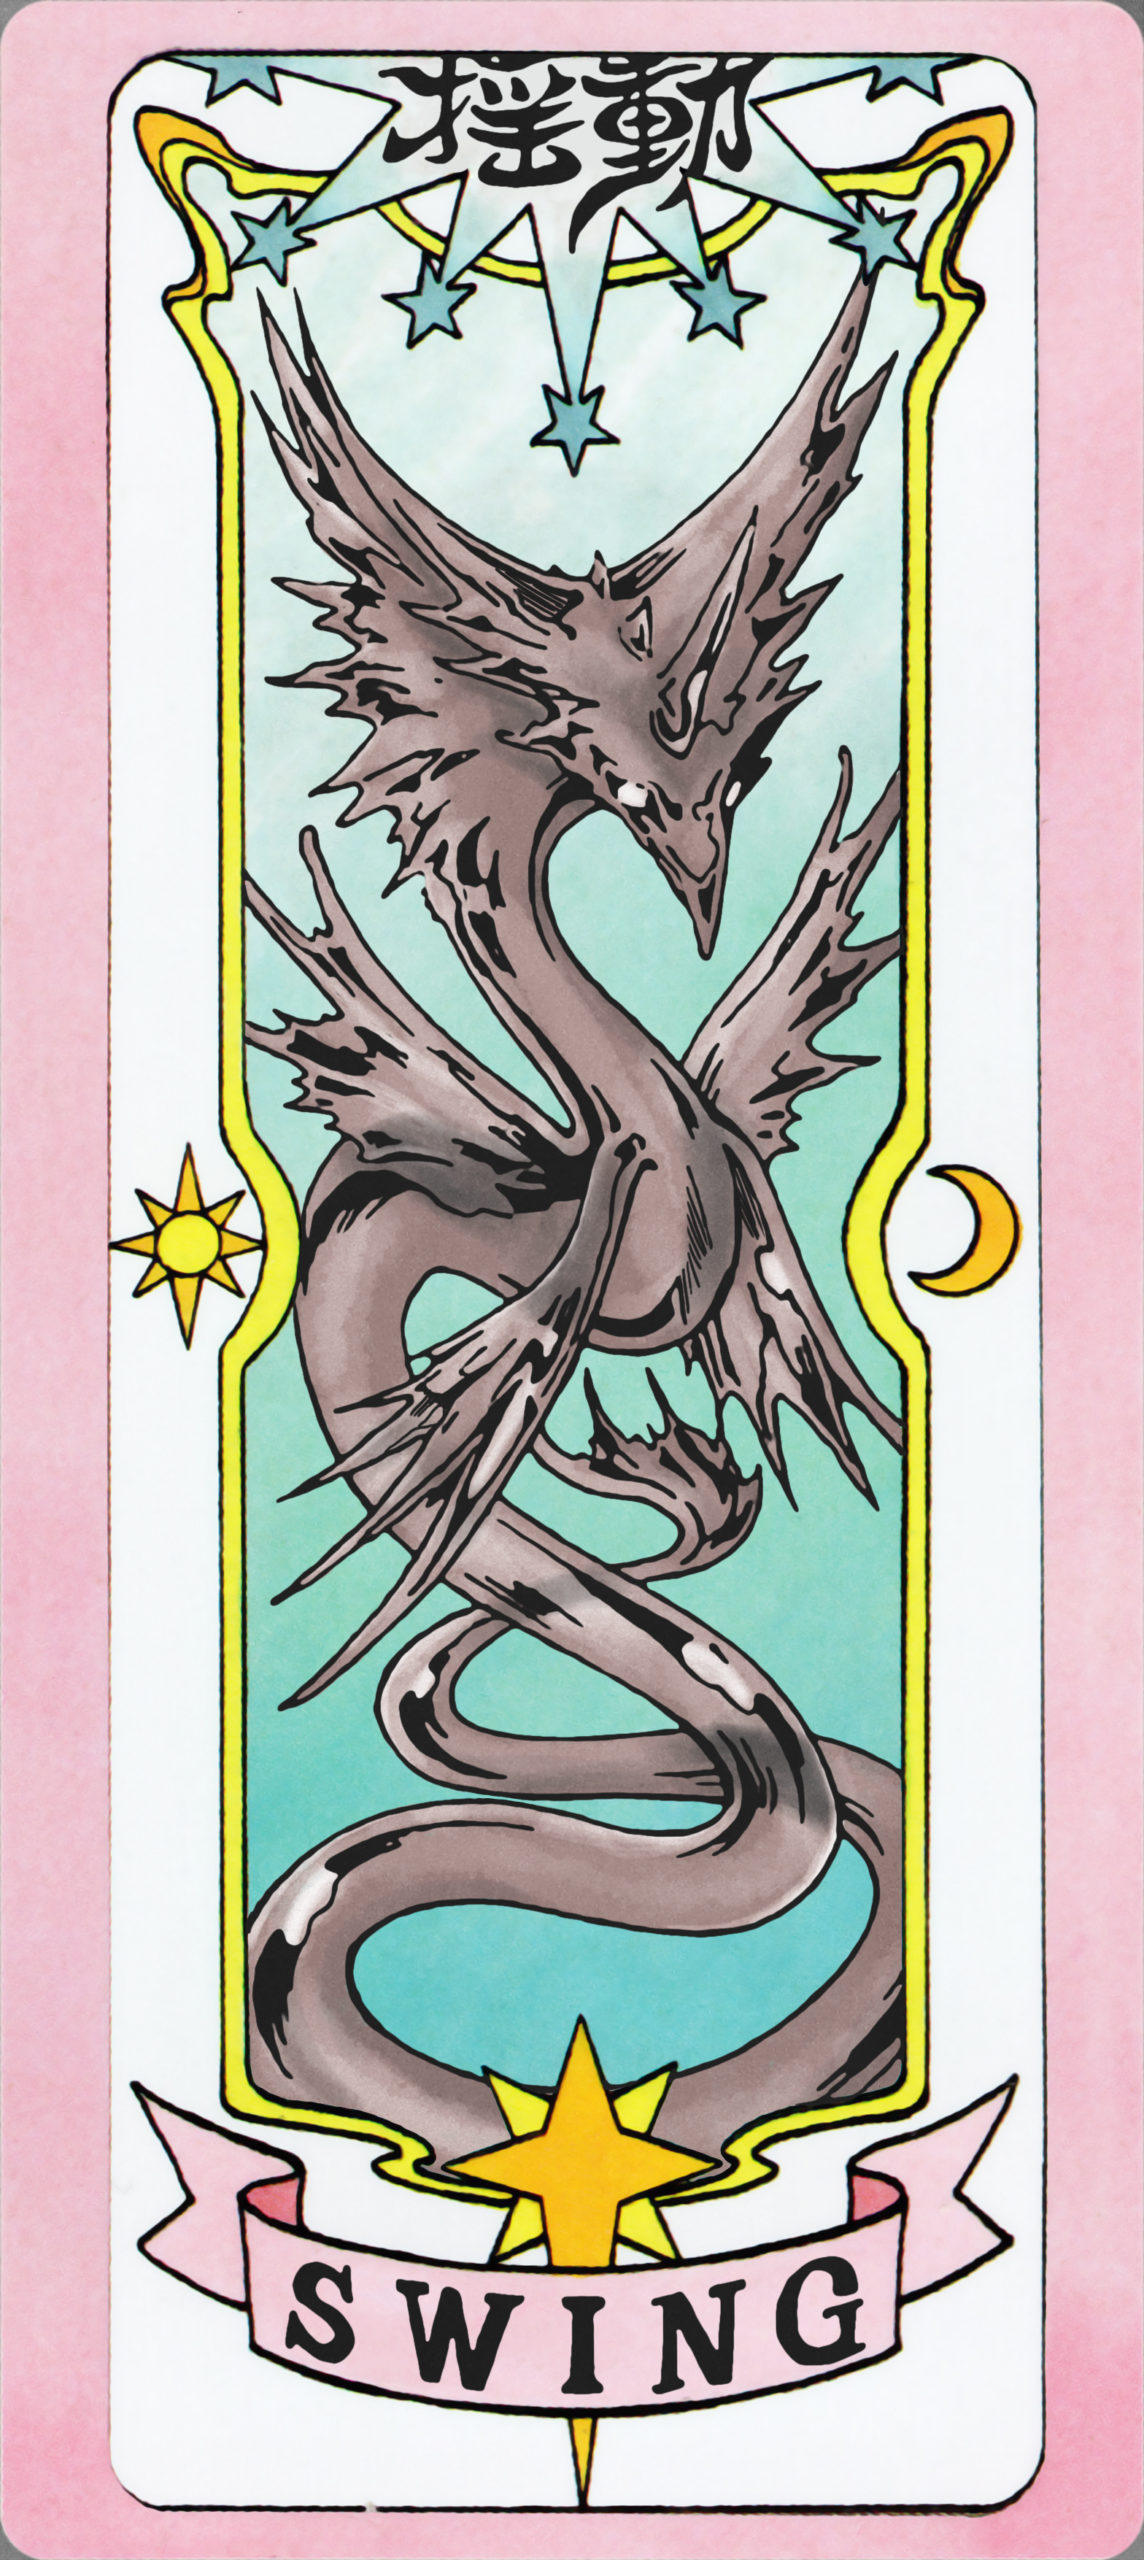 The Swing Clear Card. (Image: CLAMP)